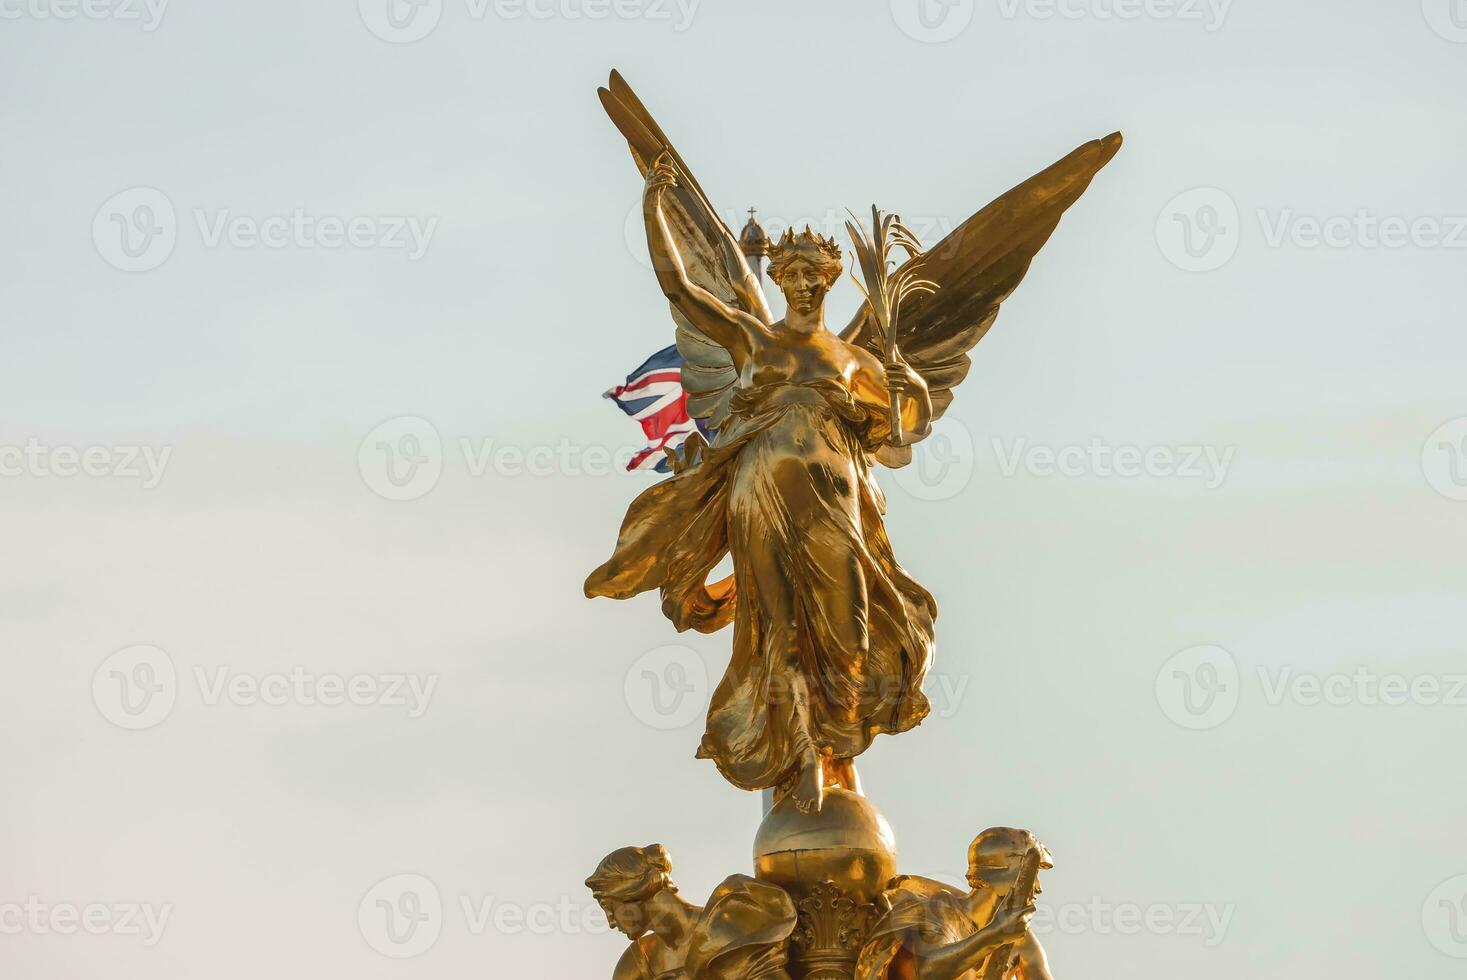 The Golden Angel of Victoria Memorial on sunny day photo